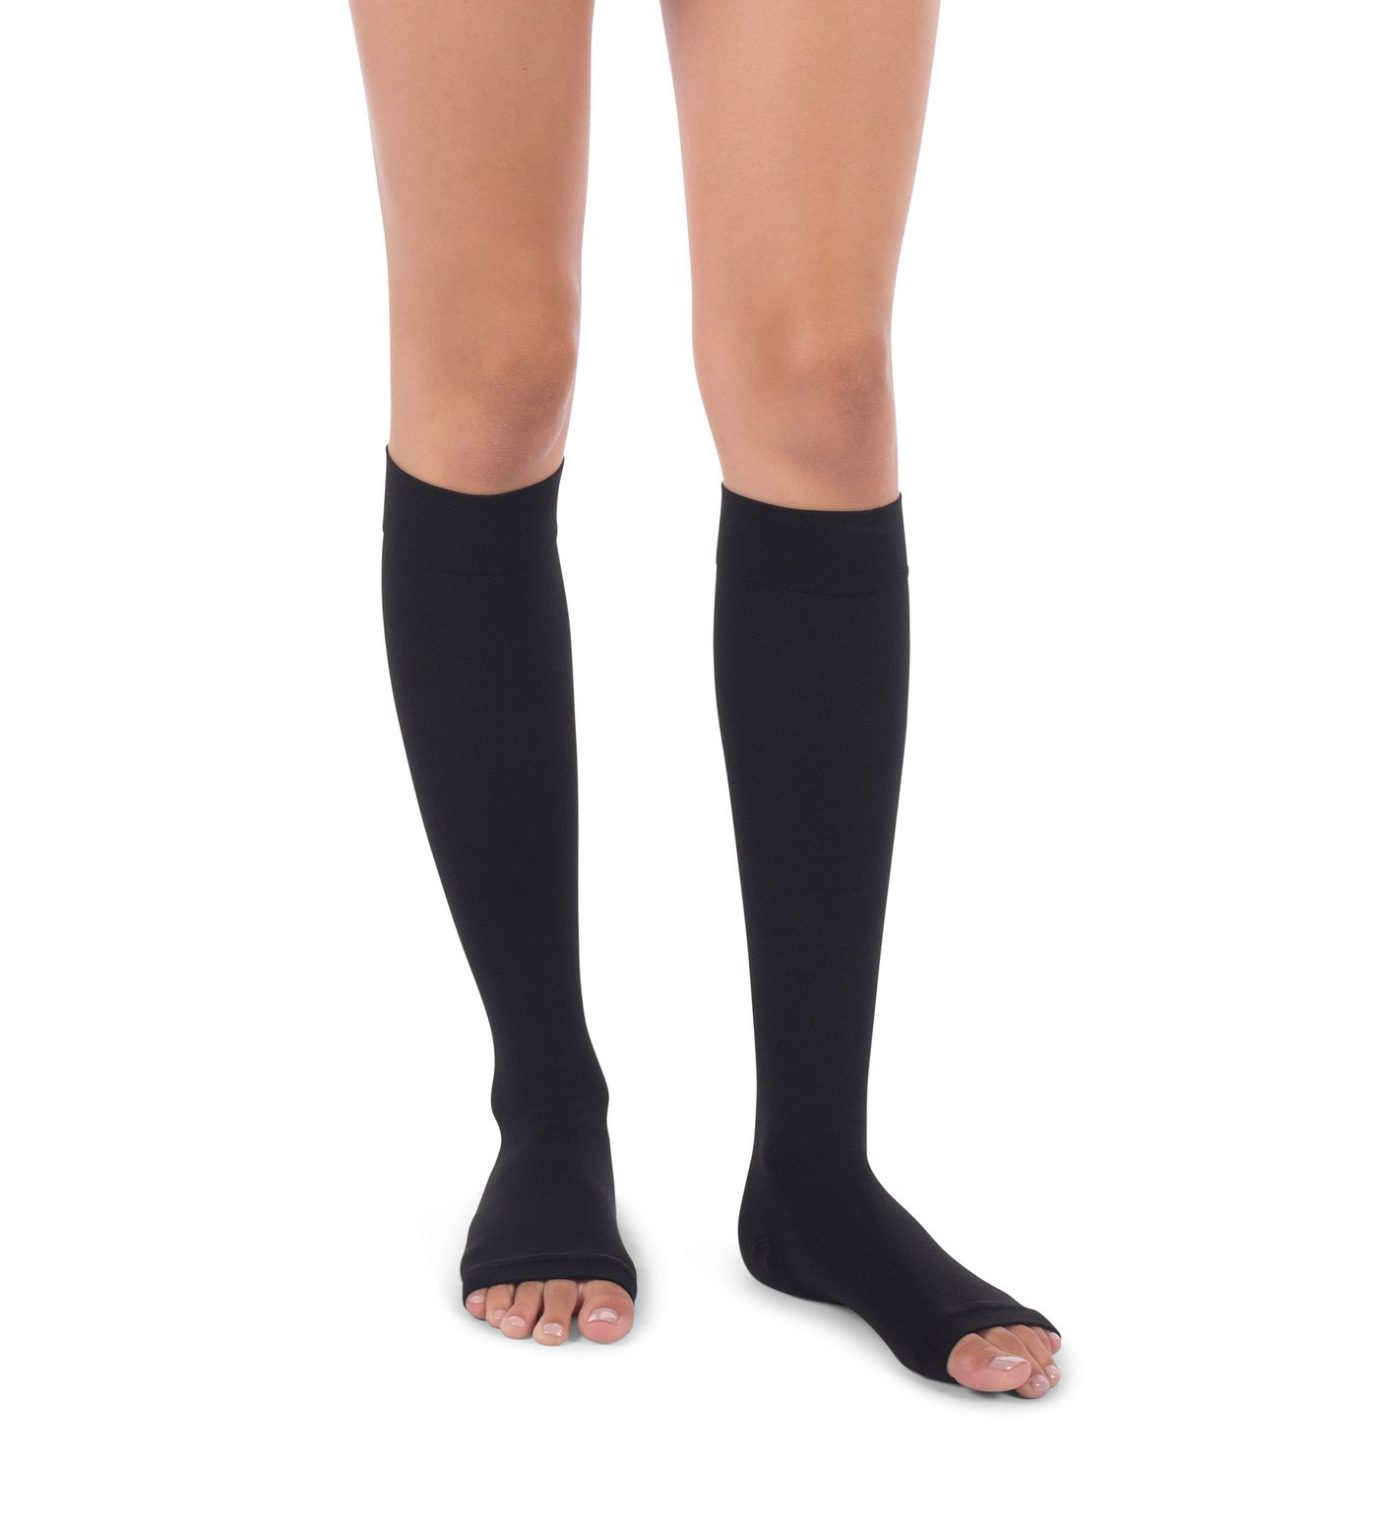 Toeless Compression Sock Complete Guide With Pictures 4793